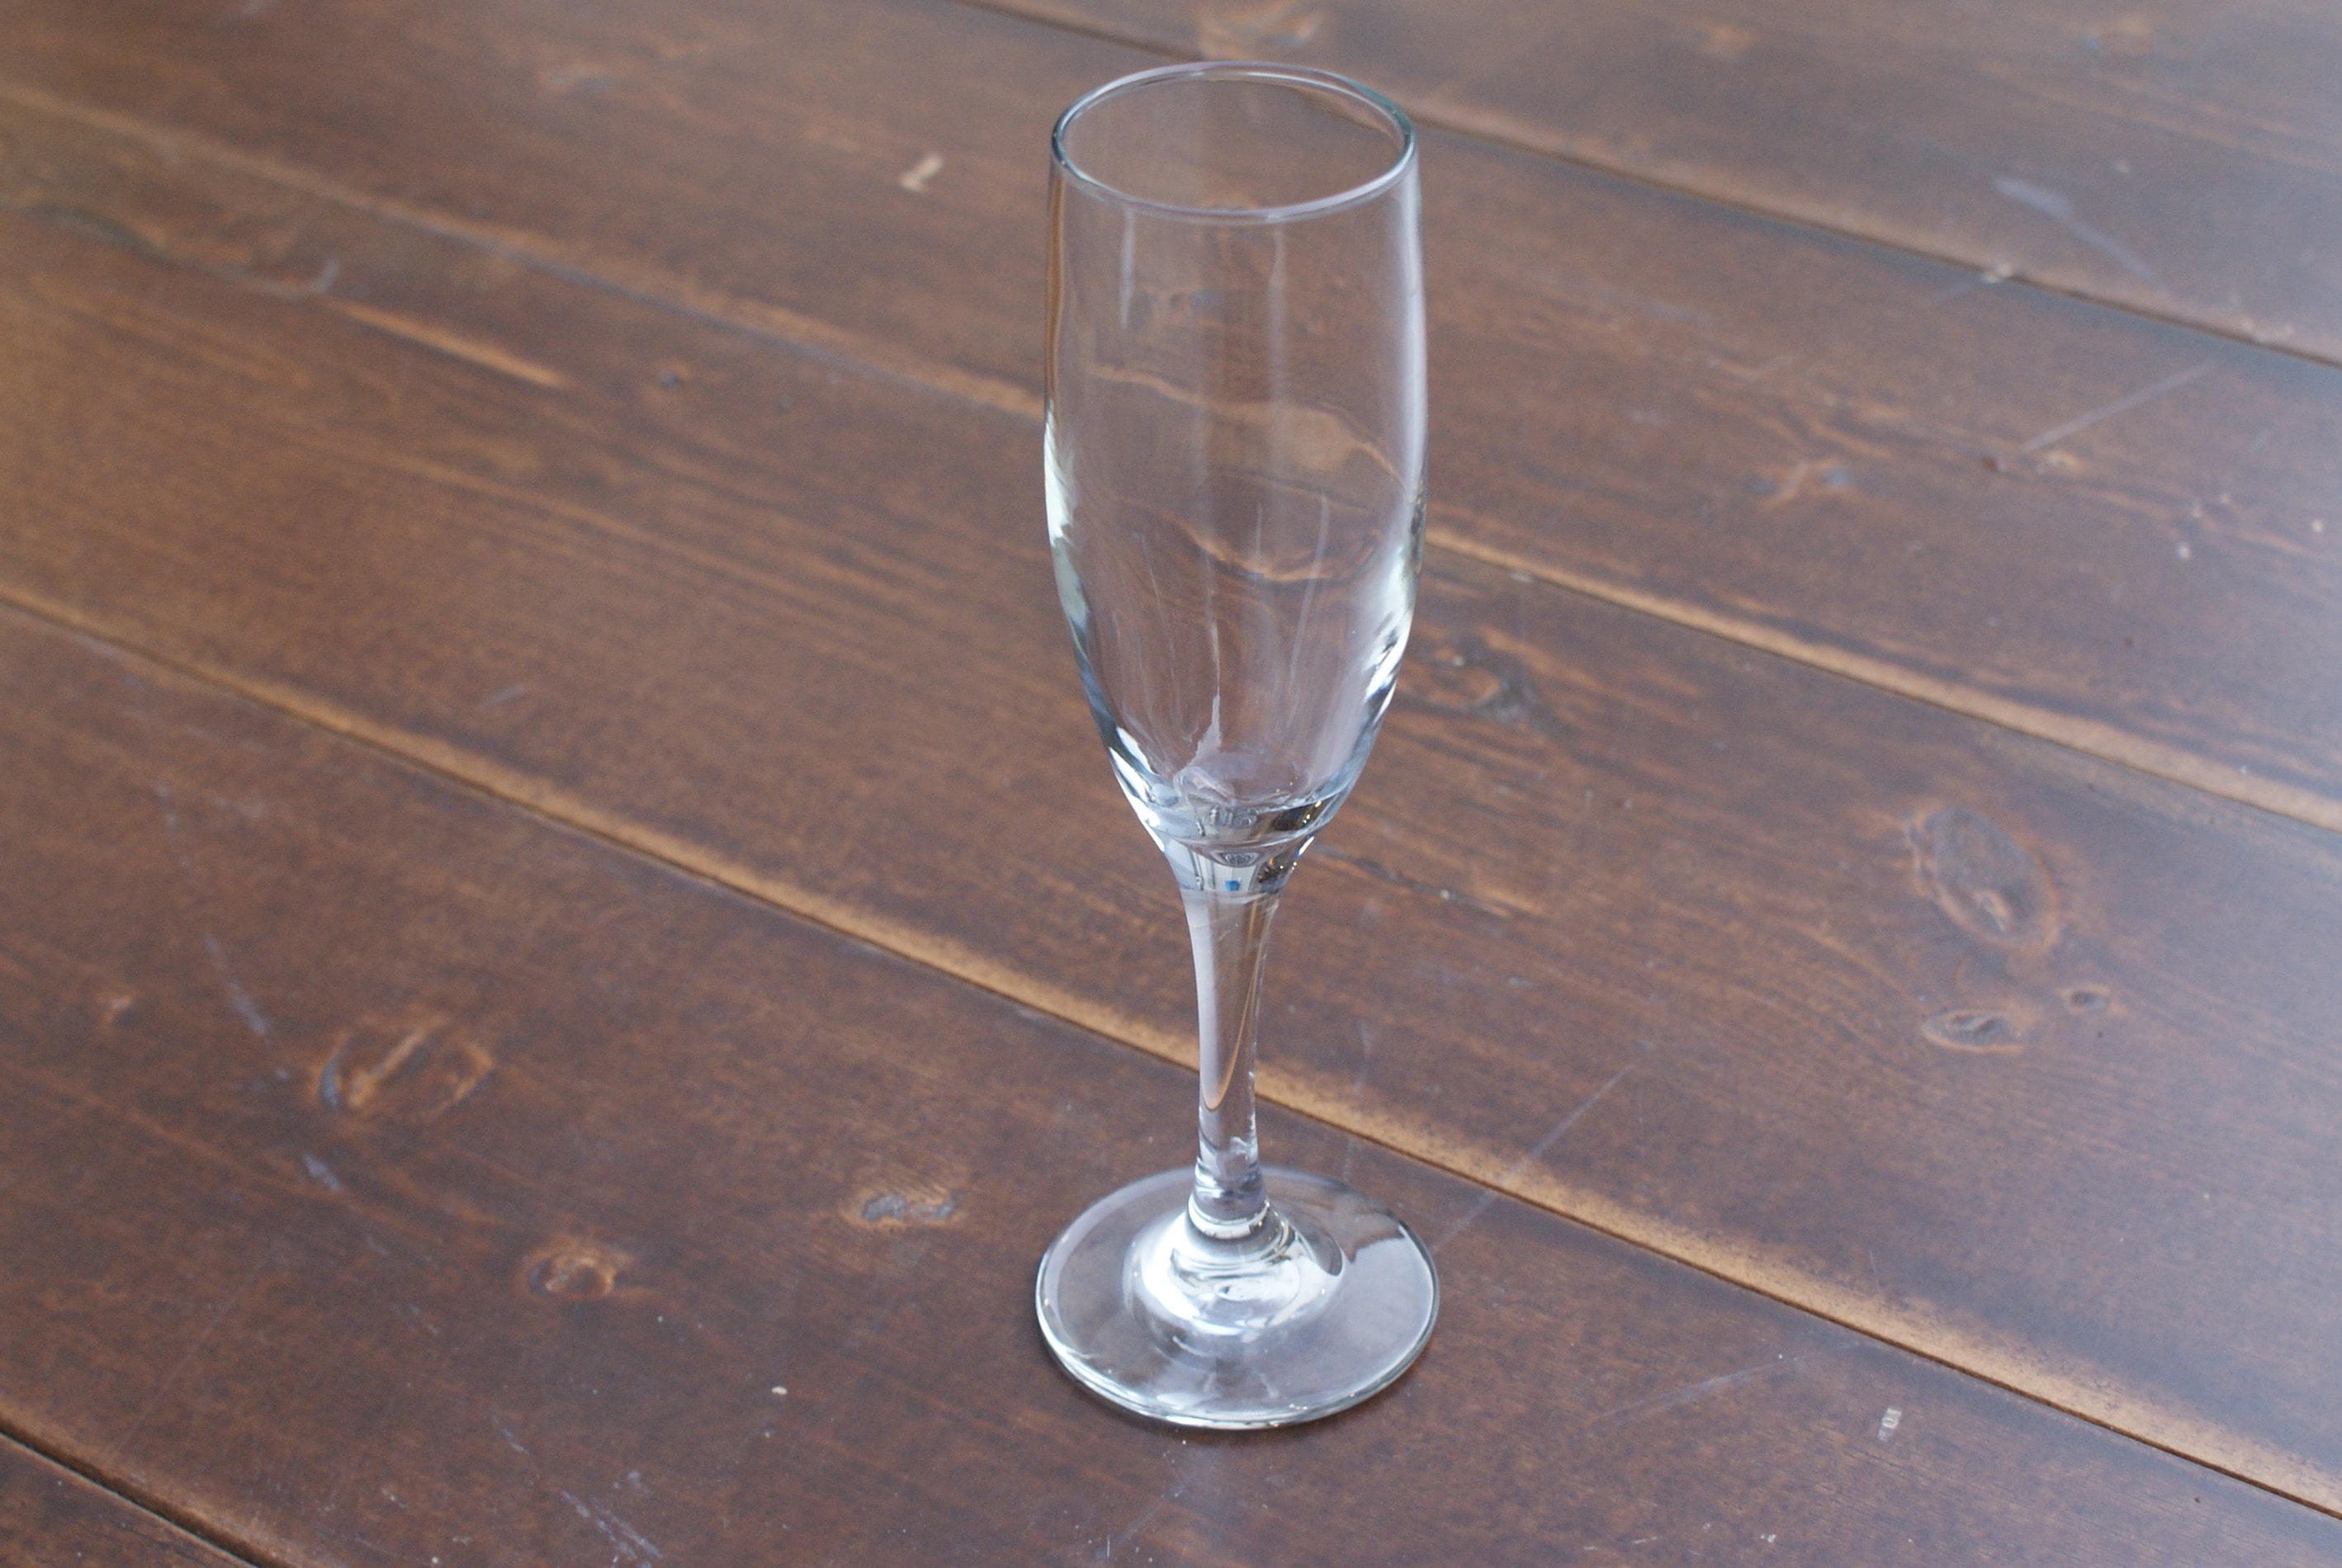 empty champagne flute on a wood table